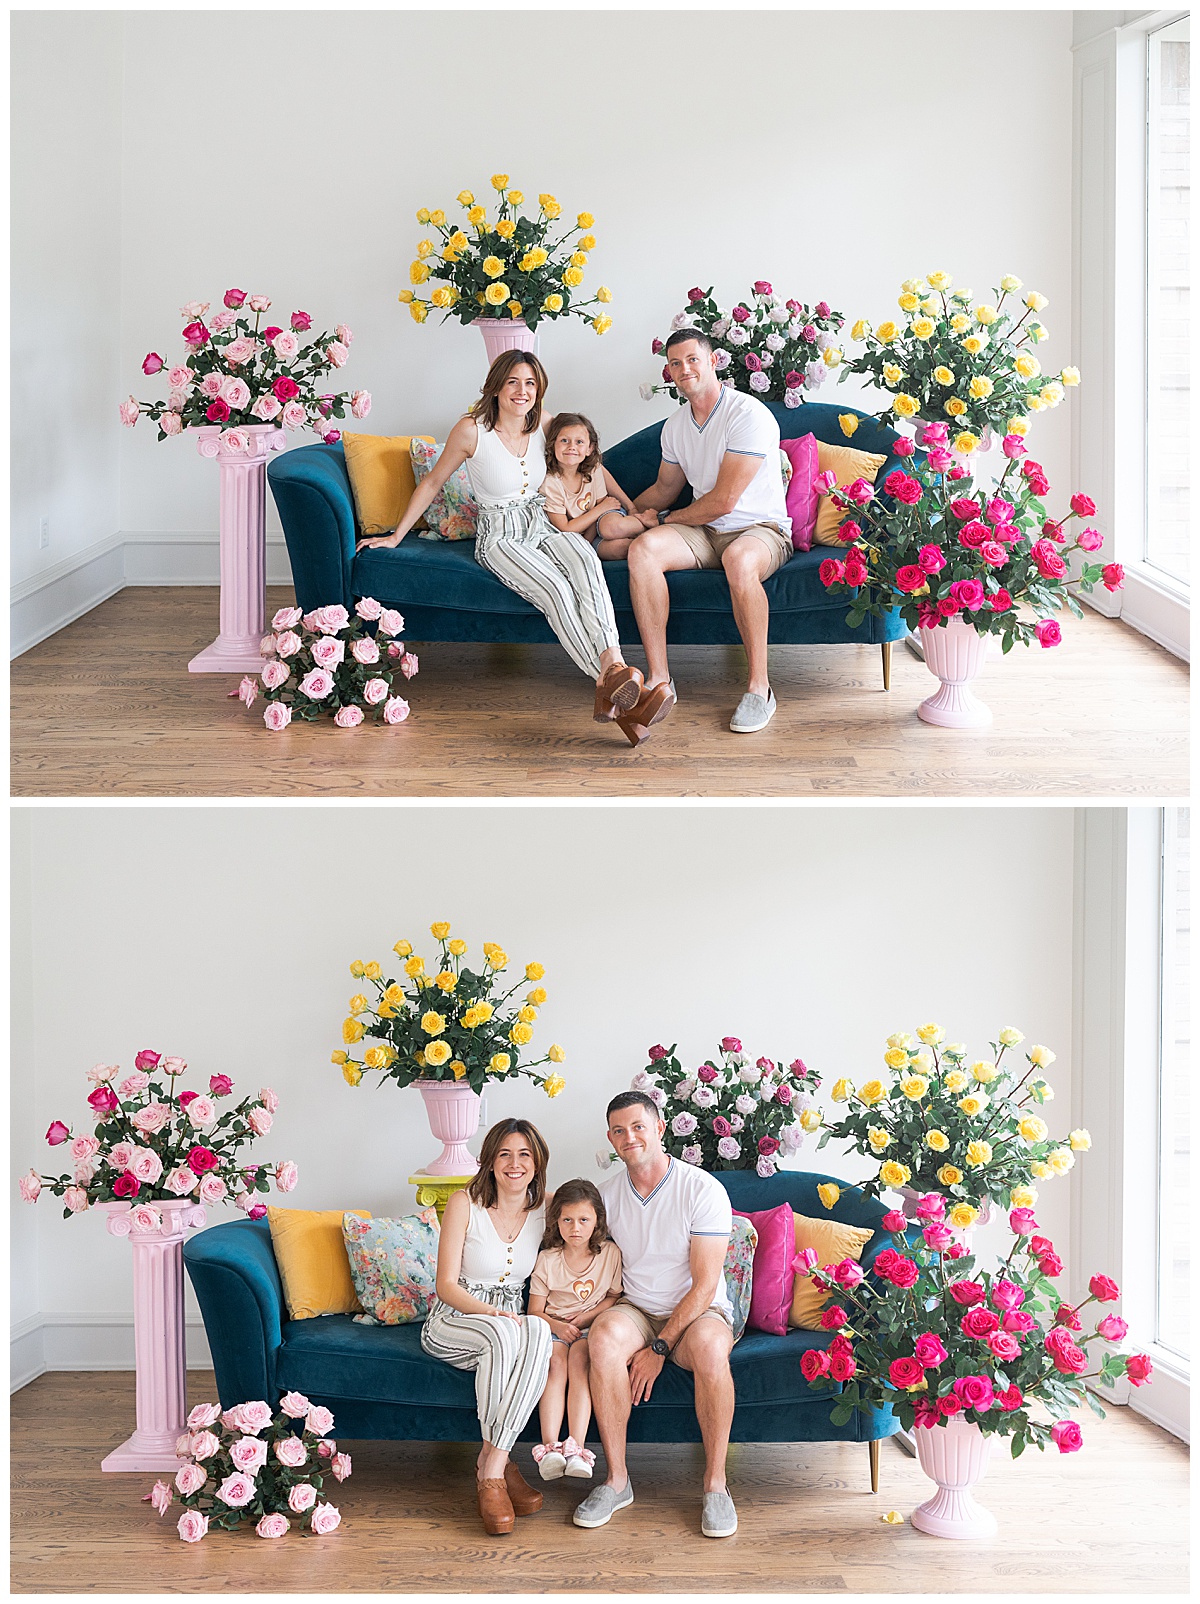 Family sits together on the couch during Fun and Bright Spring Minis